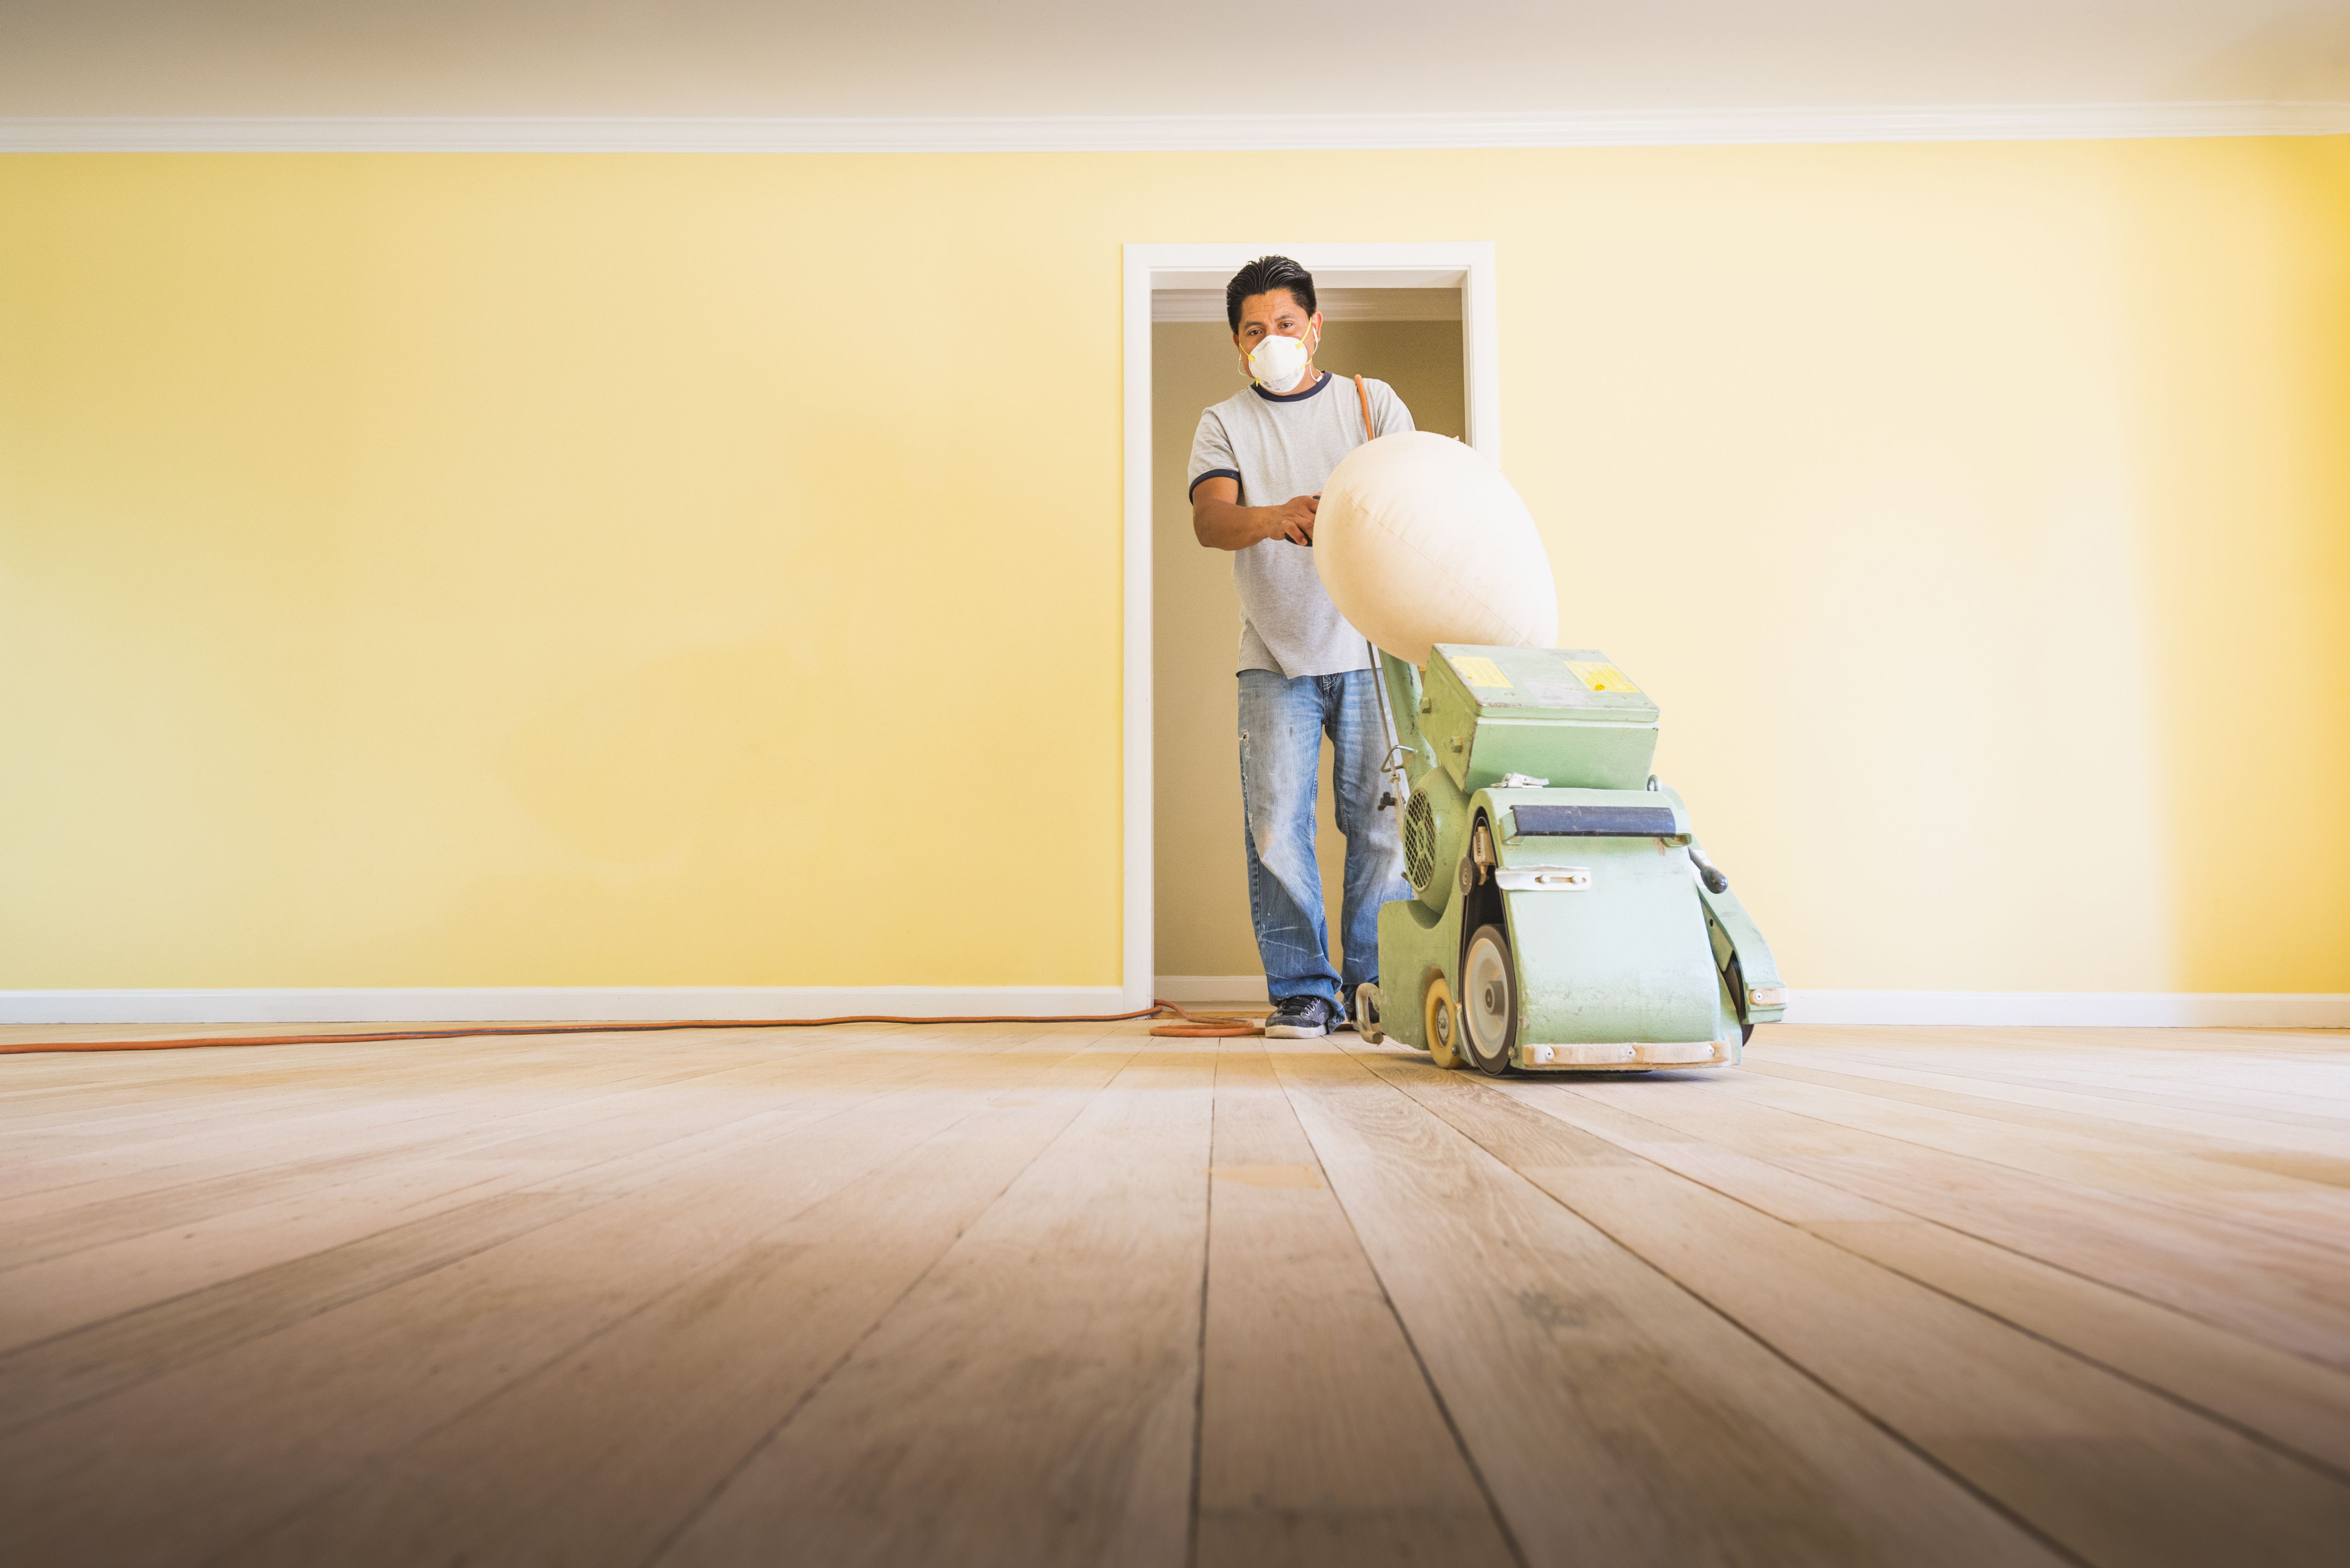 how to repair gouges in hardwood floors of should you paint walls or refinish floors first regarding floorsandingafterpainting 5a8f08dfae9ab80037d9d878